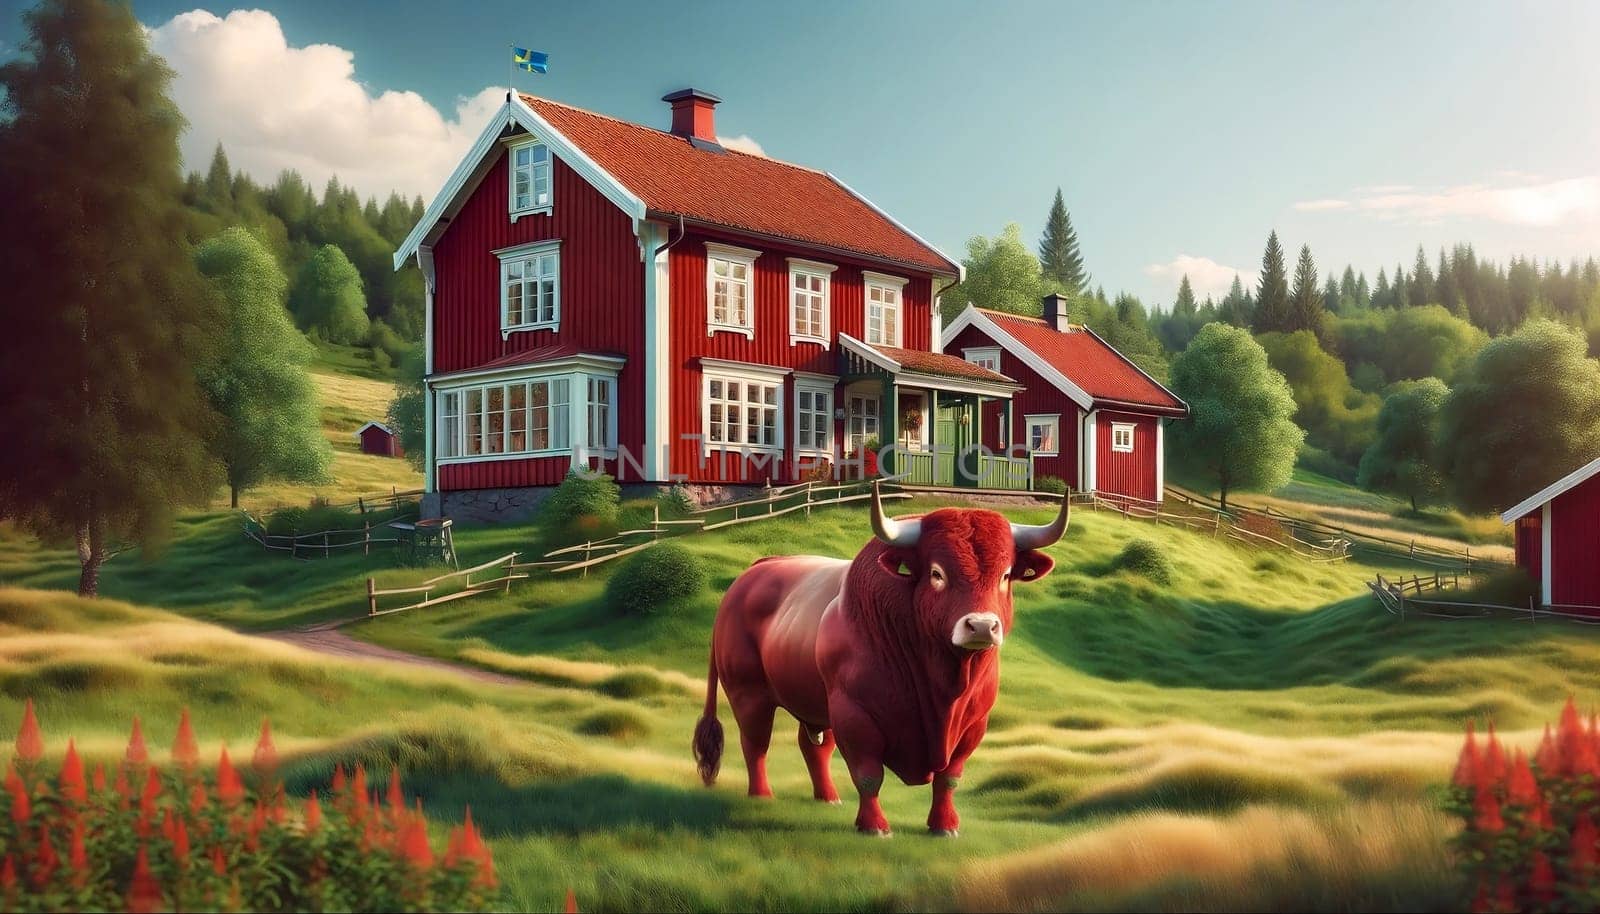 Symobol of Dalsland, a bull stands by a red house, also known as Dalslandsstuga . High quality photo